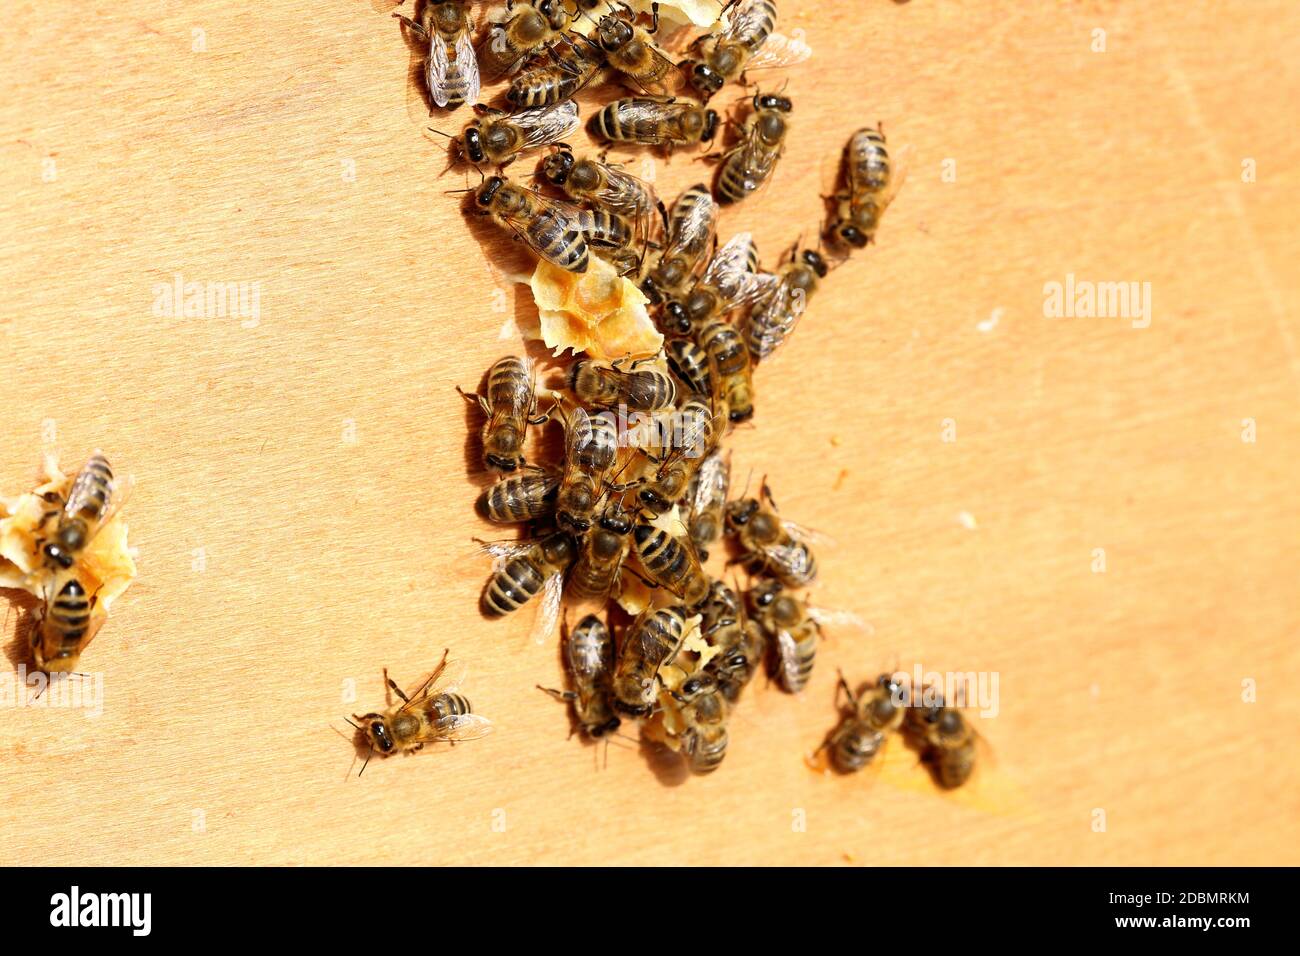 some bees on a plate Stock Photo